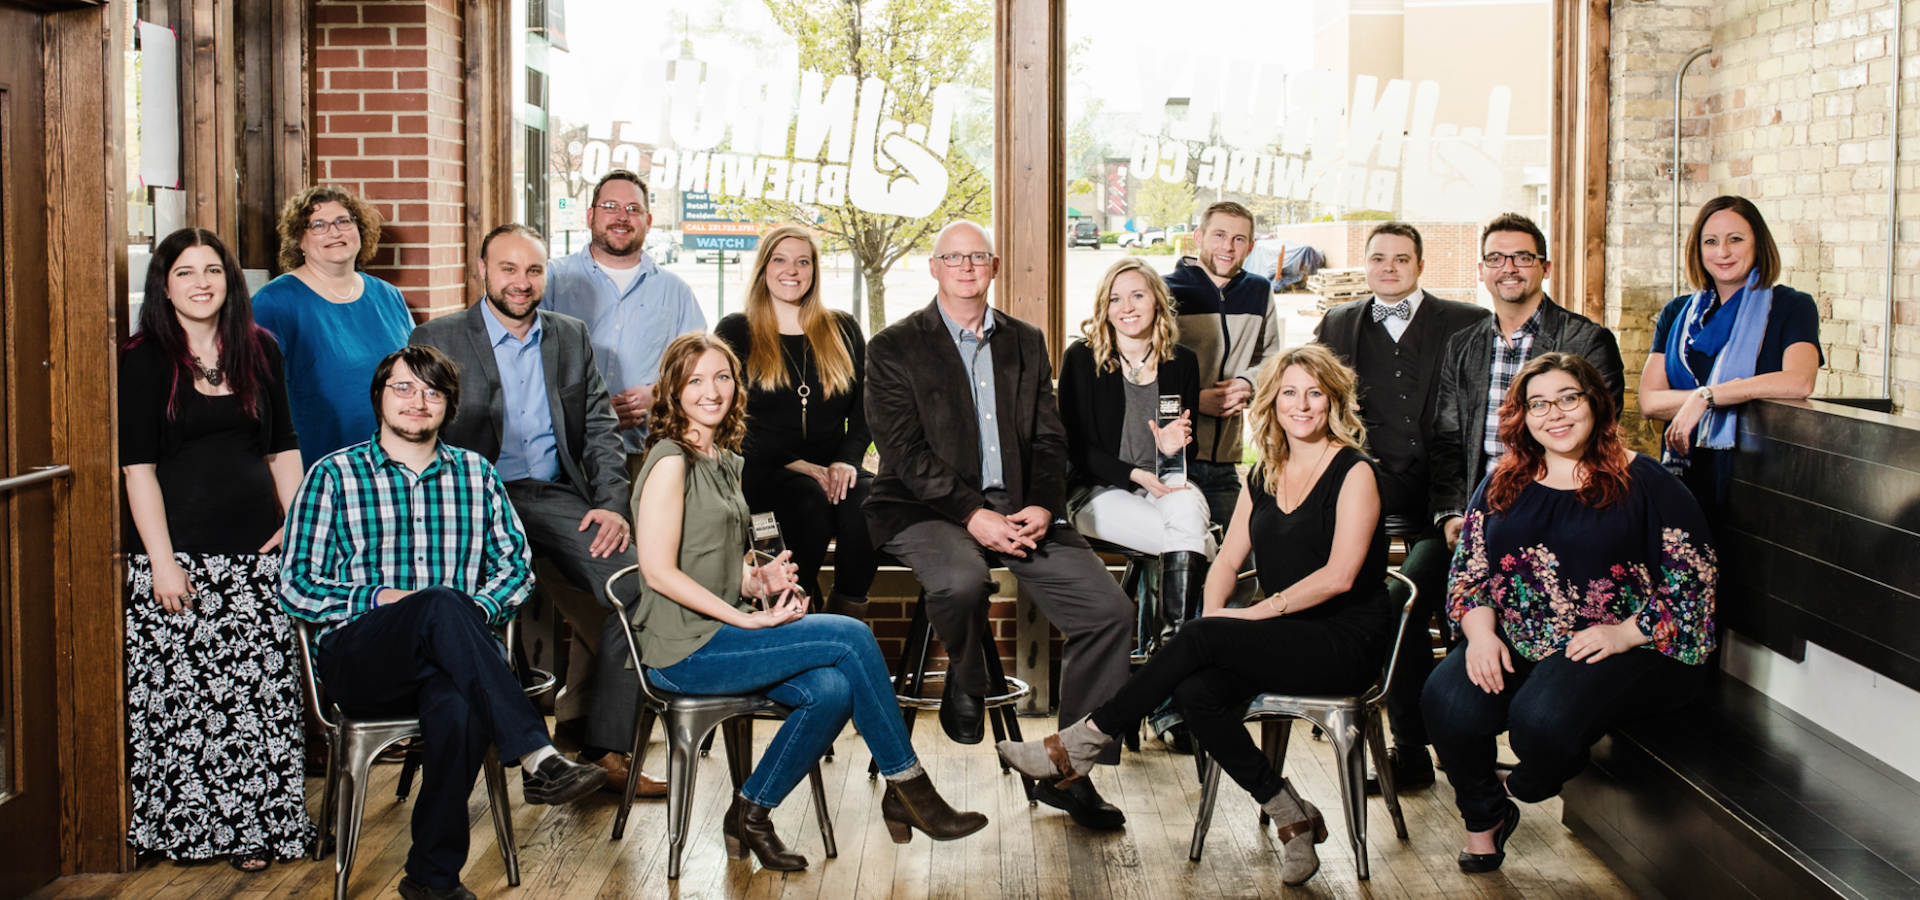 Revel Named One of West Michigan’s 101 Best and Brightest Companies To Work For Two Years Running